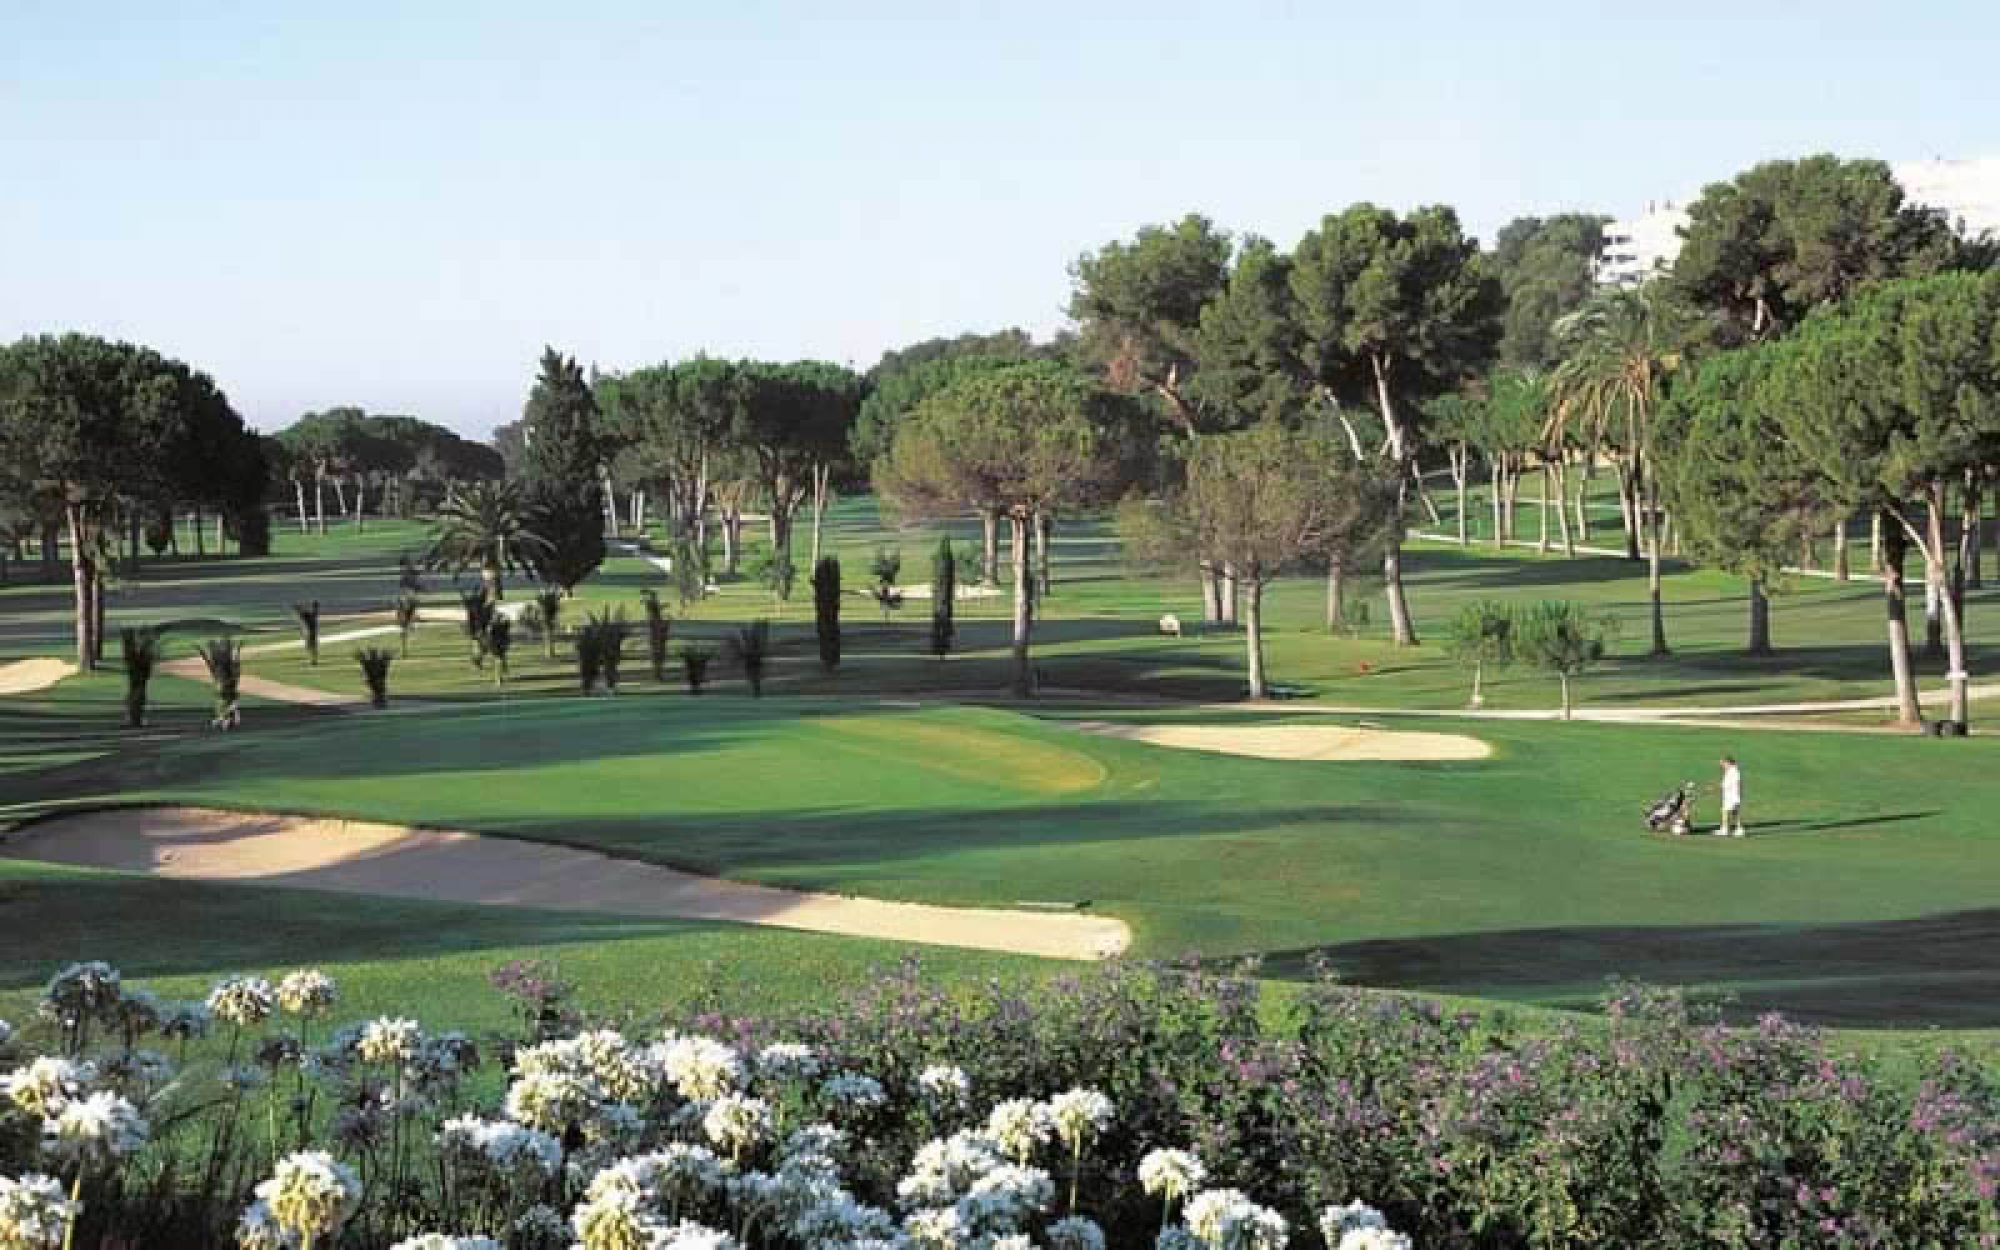 Rio Real Golf Club consists of among the preferred golf course around Costa Del Sol